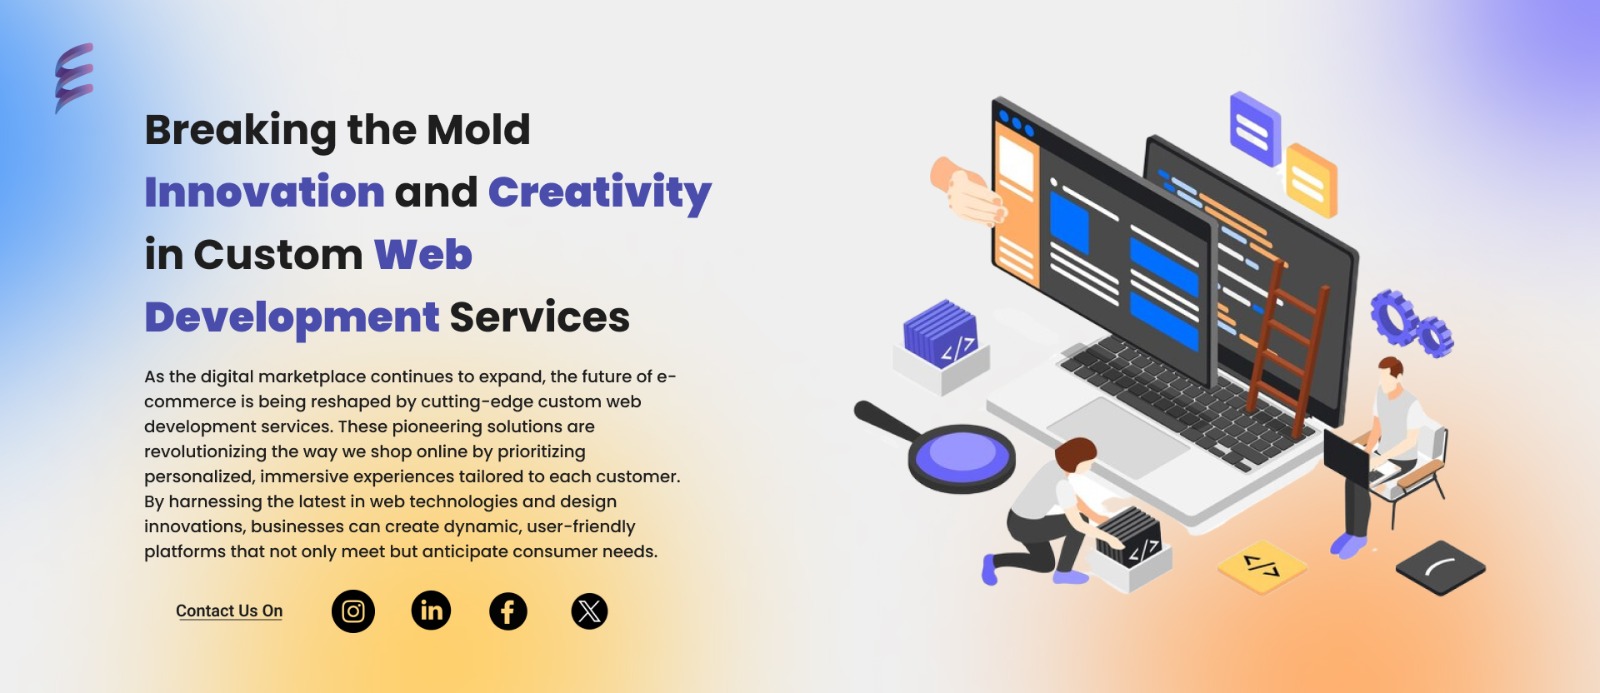 Breaking the Mold Innovation and Creativity in Custom Web Development Services